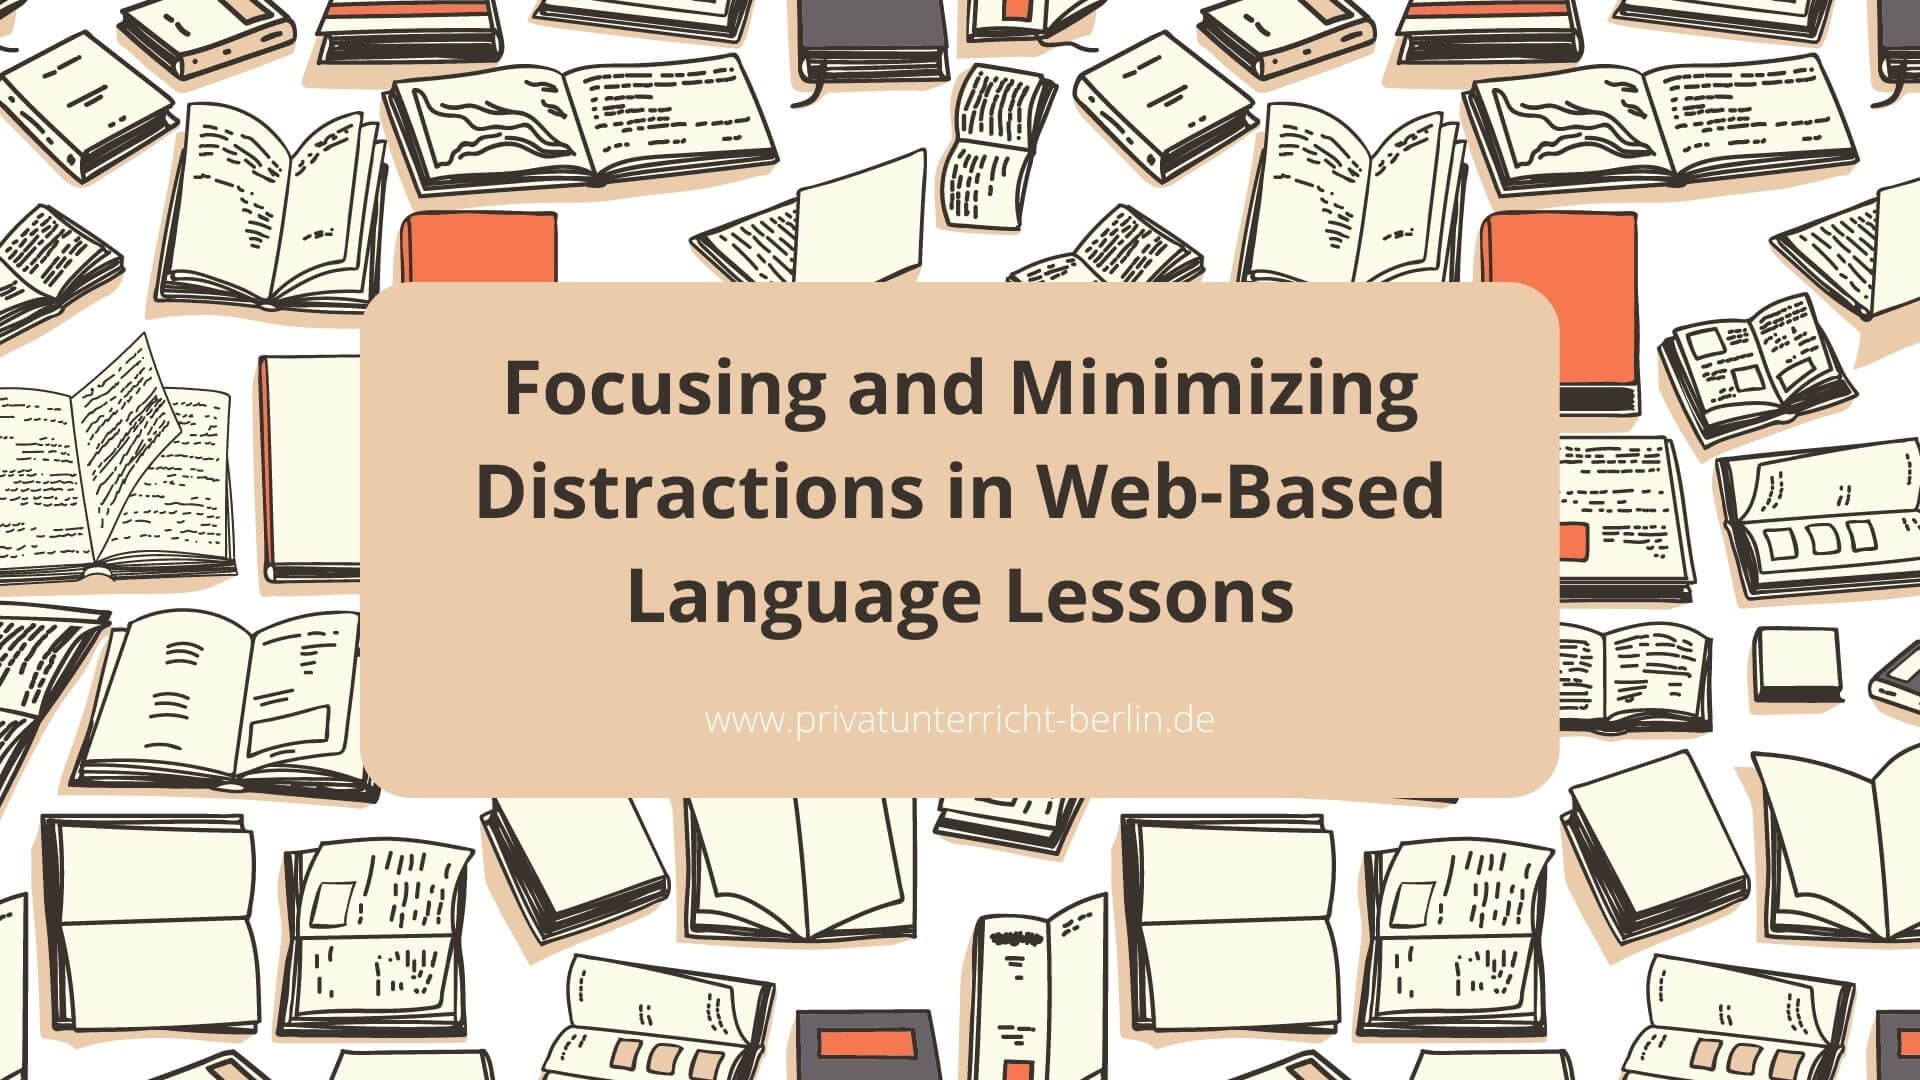 Focusing And Minimizing Distractions In Web-Based Language Lessons